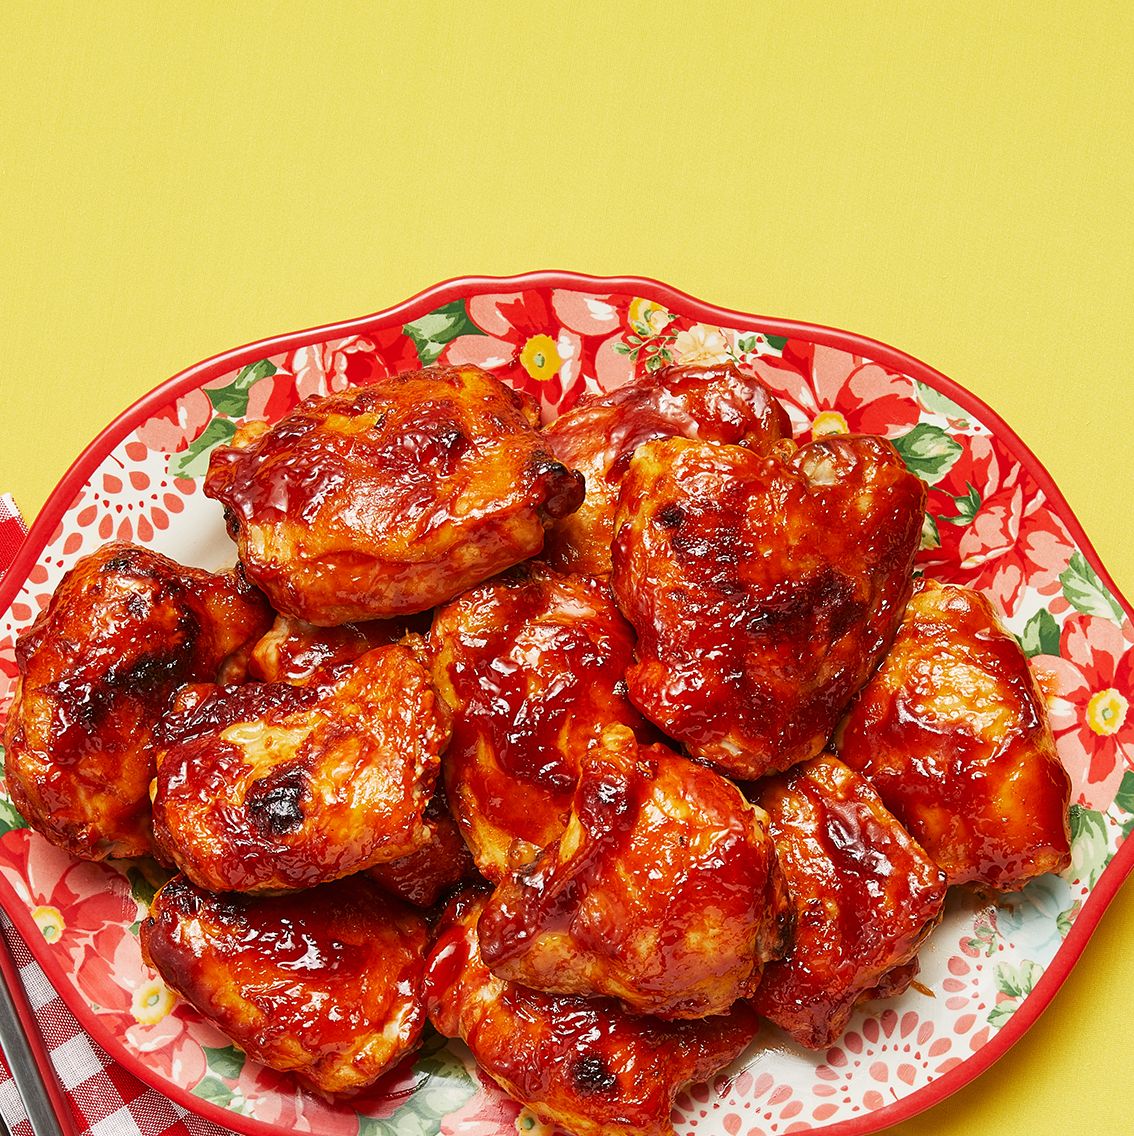 https://hips.hearstapps.com/hmg-prod/images/barbecue-chicken-1597269498.jpg?crop=0.420xw:0.631xh;0.285xw,0.122xh&resize=1200:*